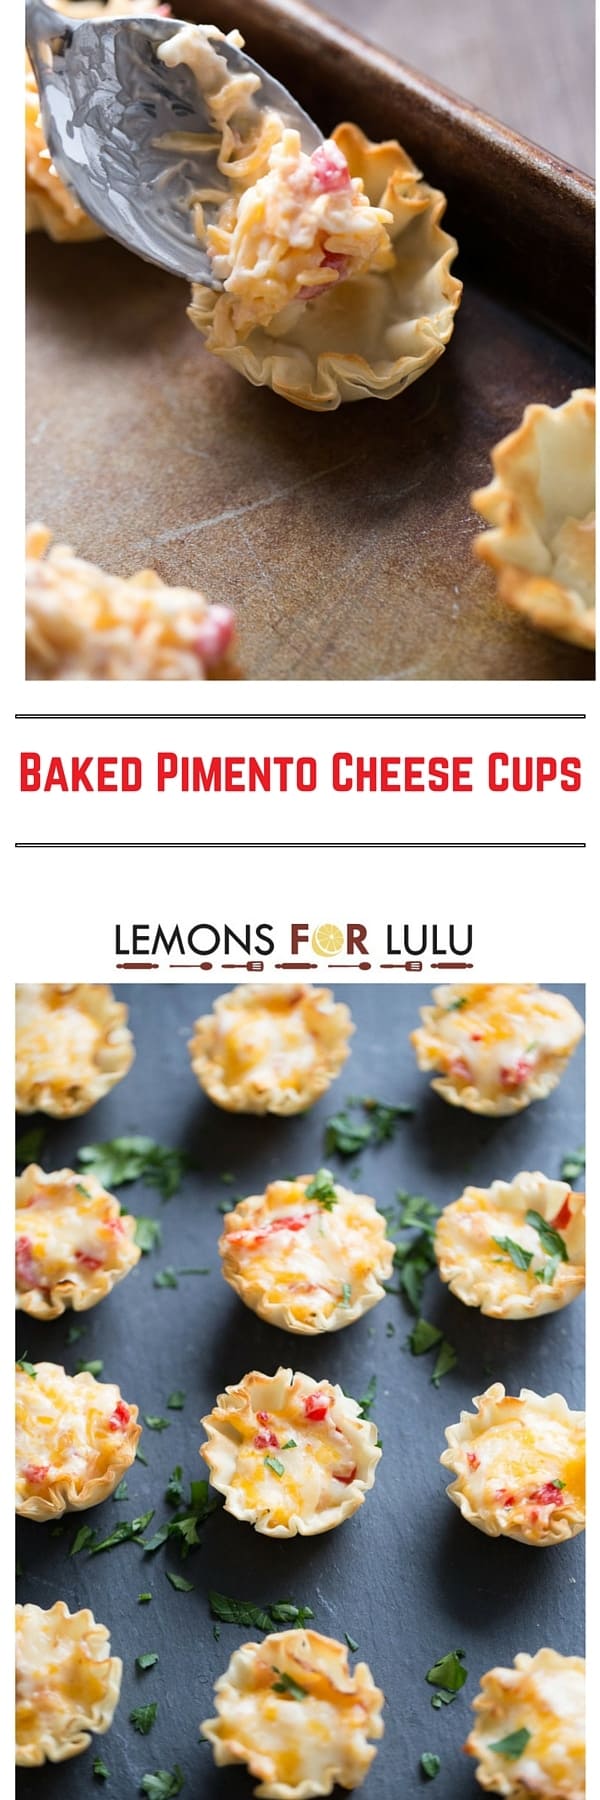 This appetizer starts with fillo shells that are filled with an easy pimento cheese recipe then baked until hot and bubbly! These little bites are irresistible!